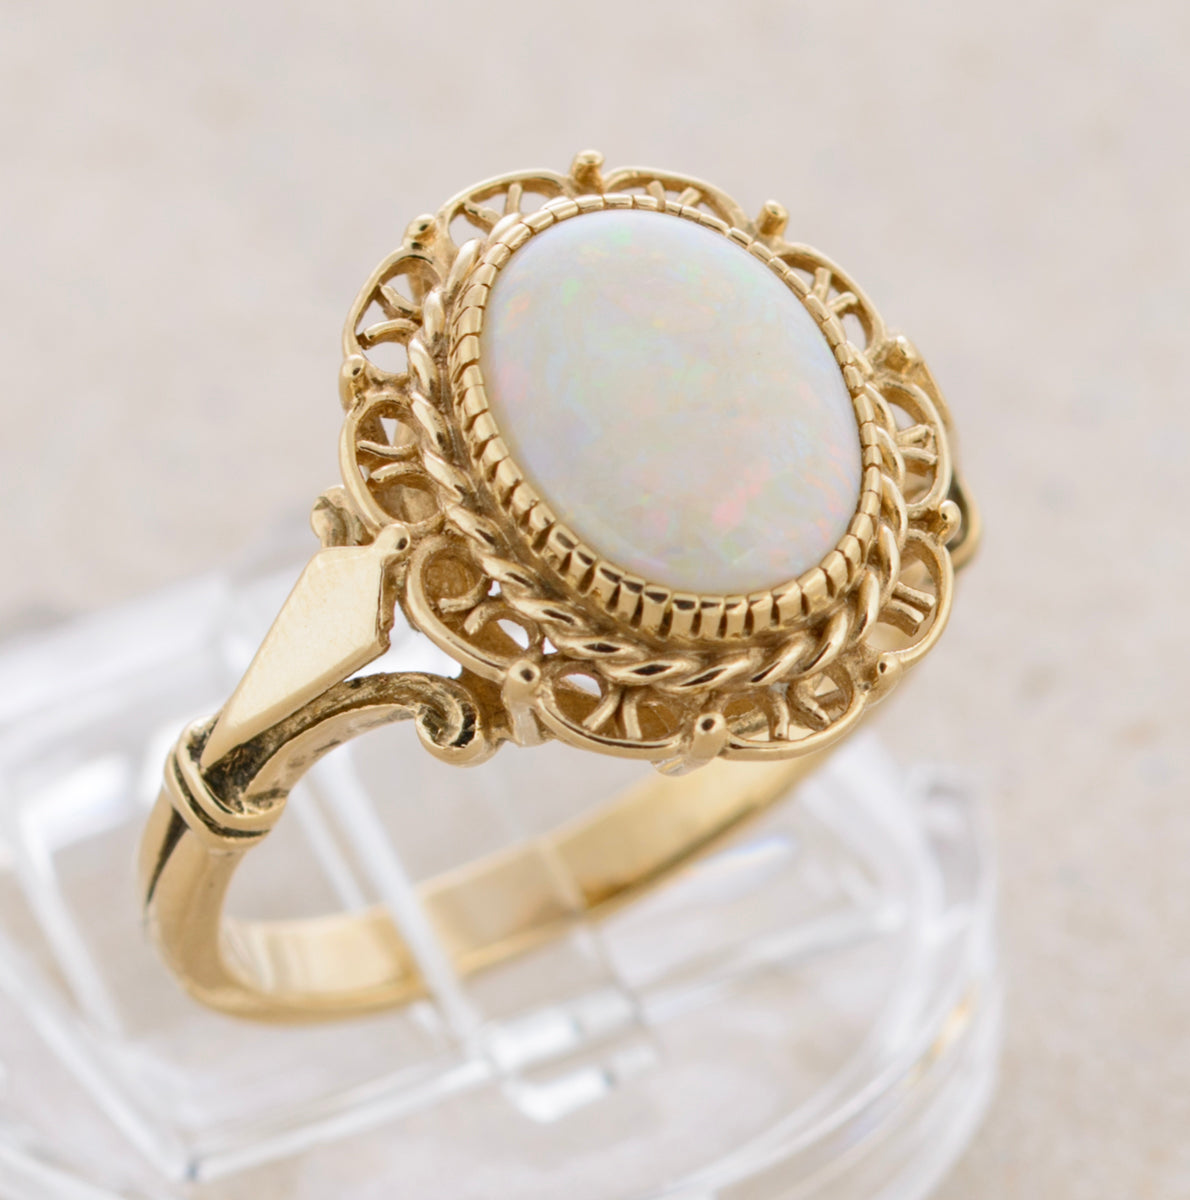 Vintage 9ct Gold Ladies Ring With Opal Cabochon & Decorative Mount c.1980's (A1764)